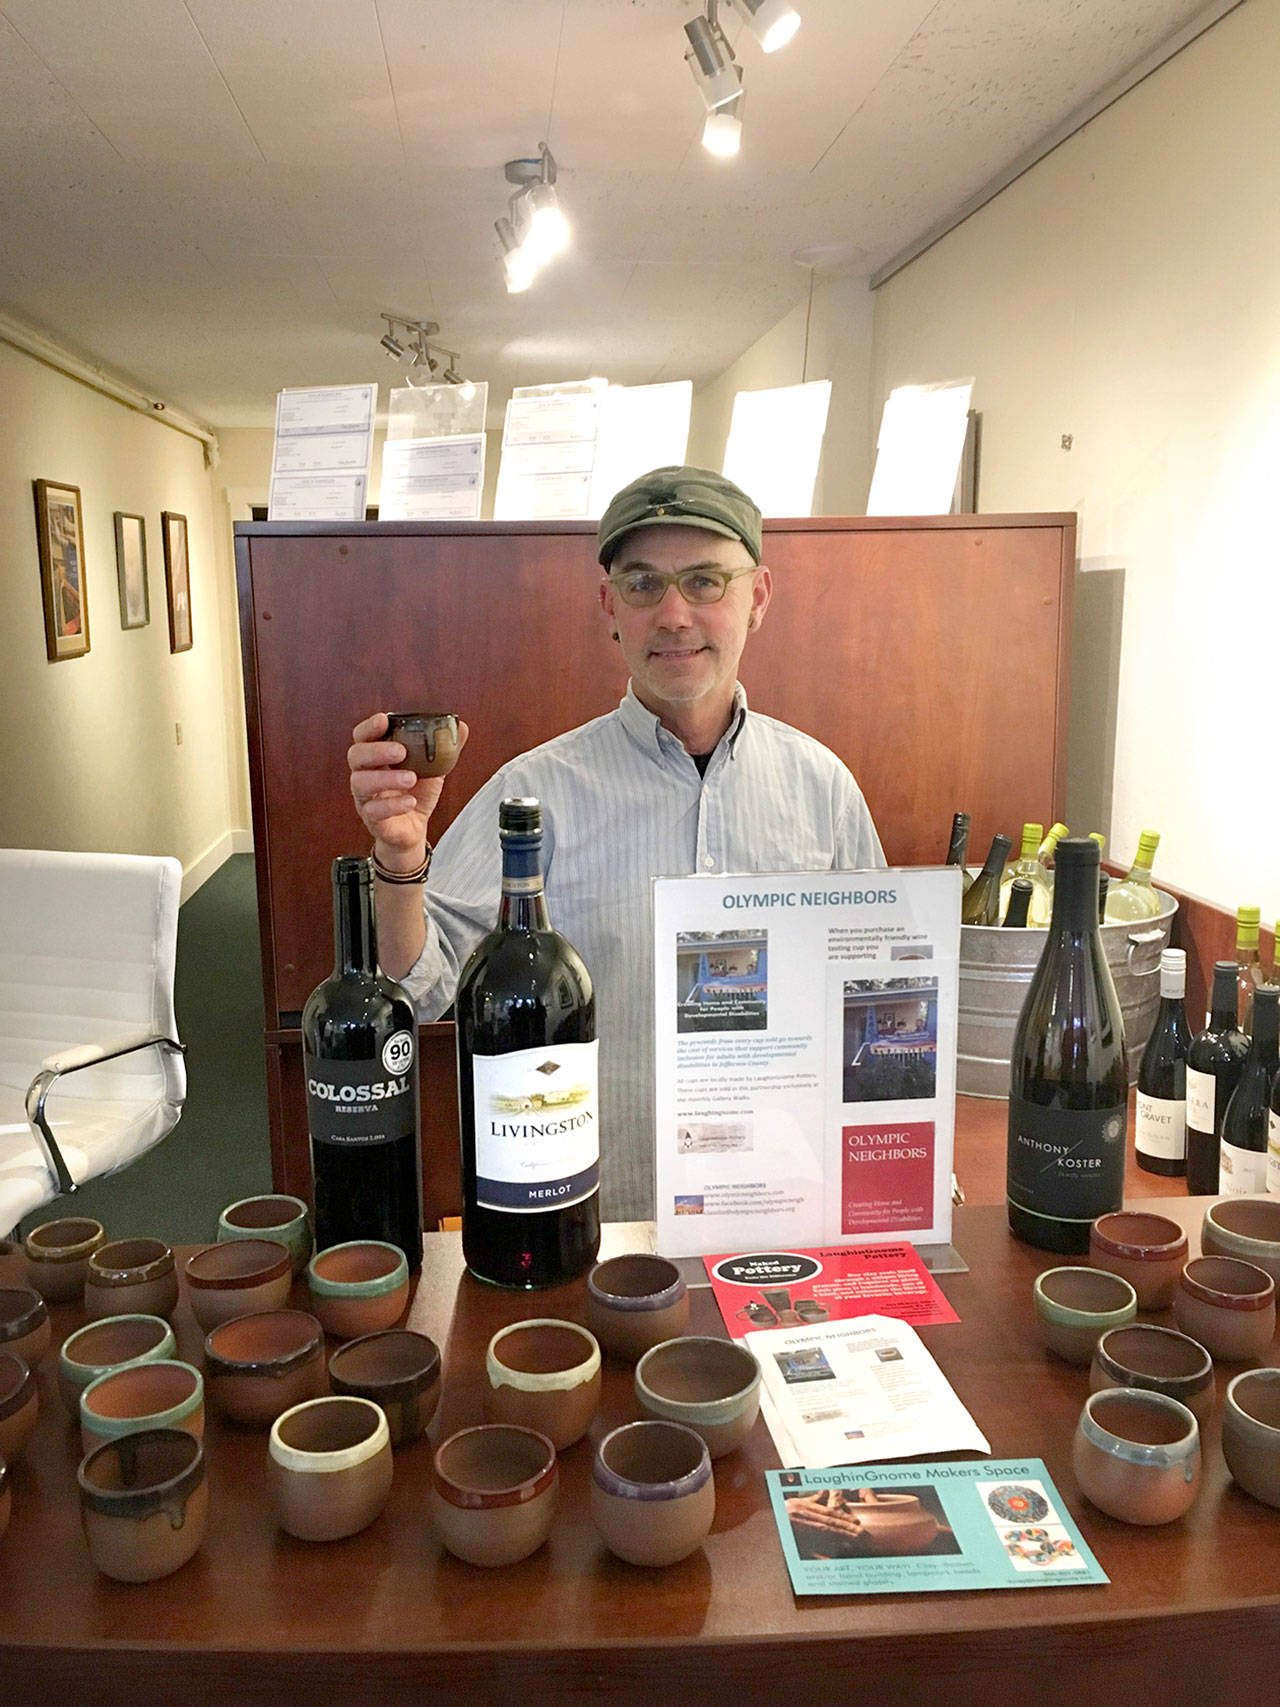 Randy Rosens, Olympic Neighbors board member, serves wine in locally crafted ceramic tasting cups at Coldwell Bankers.